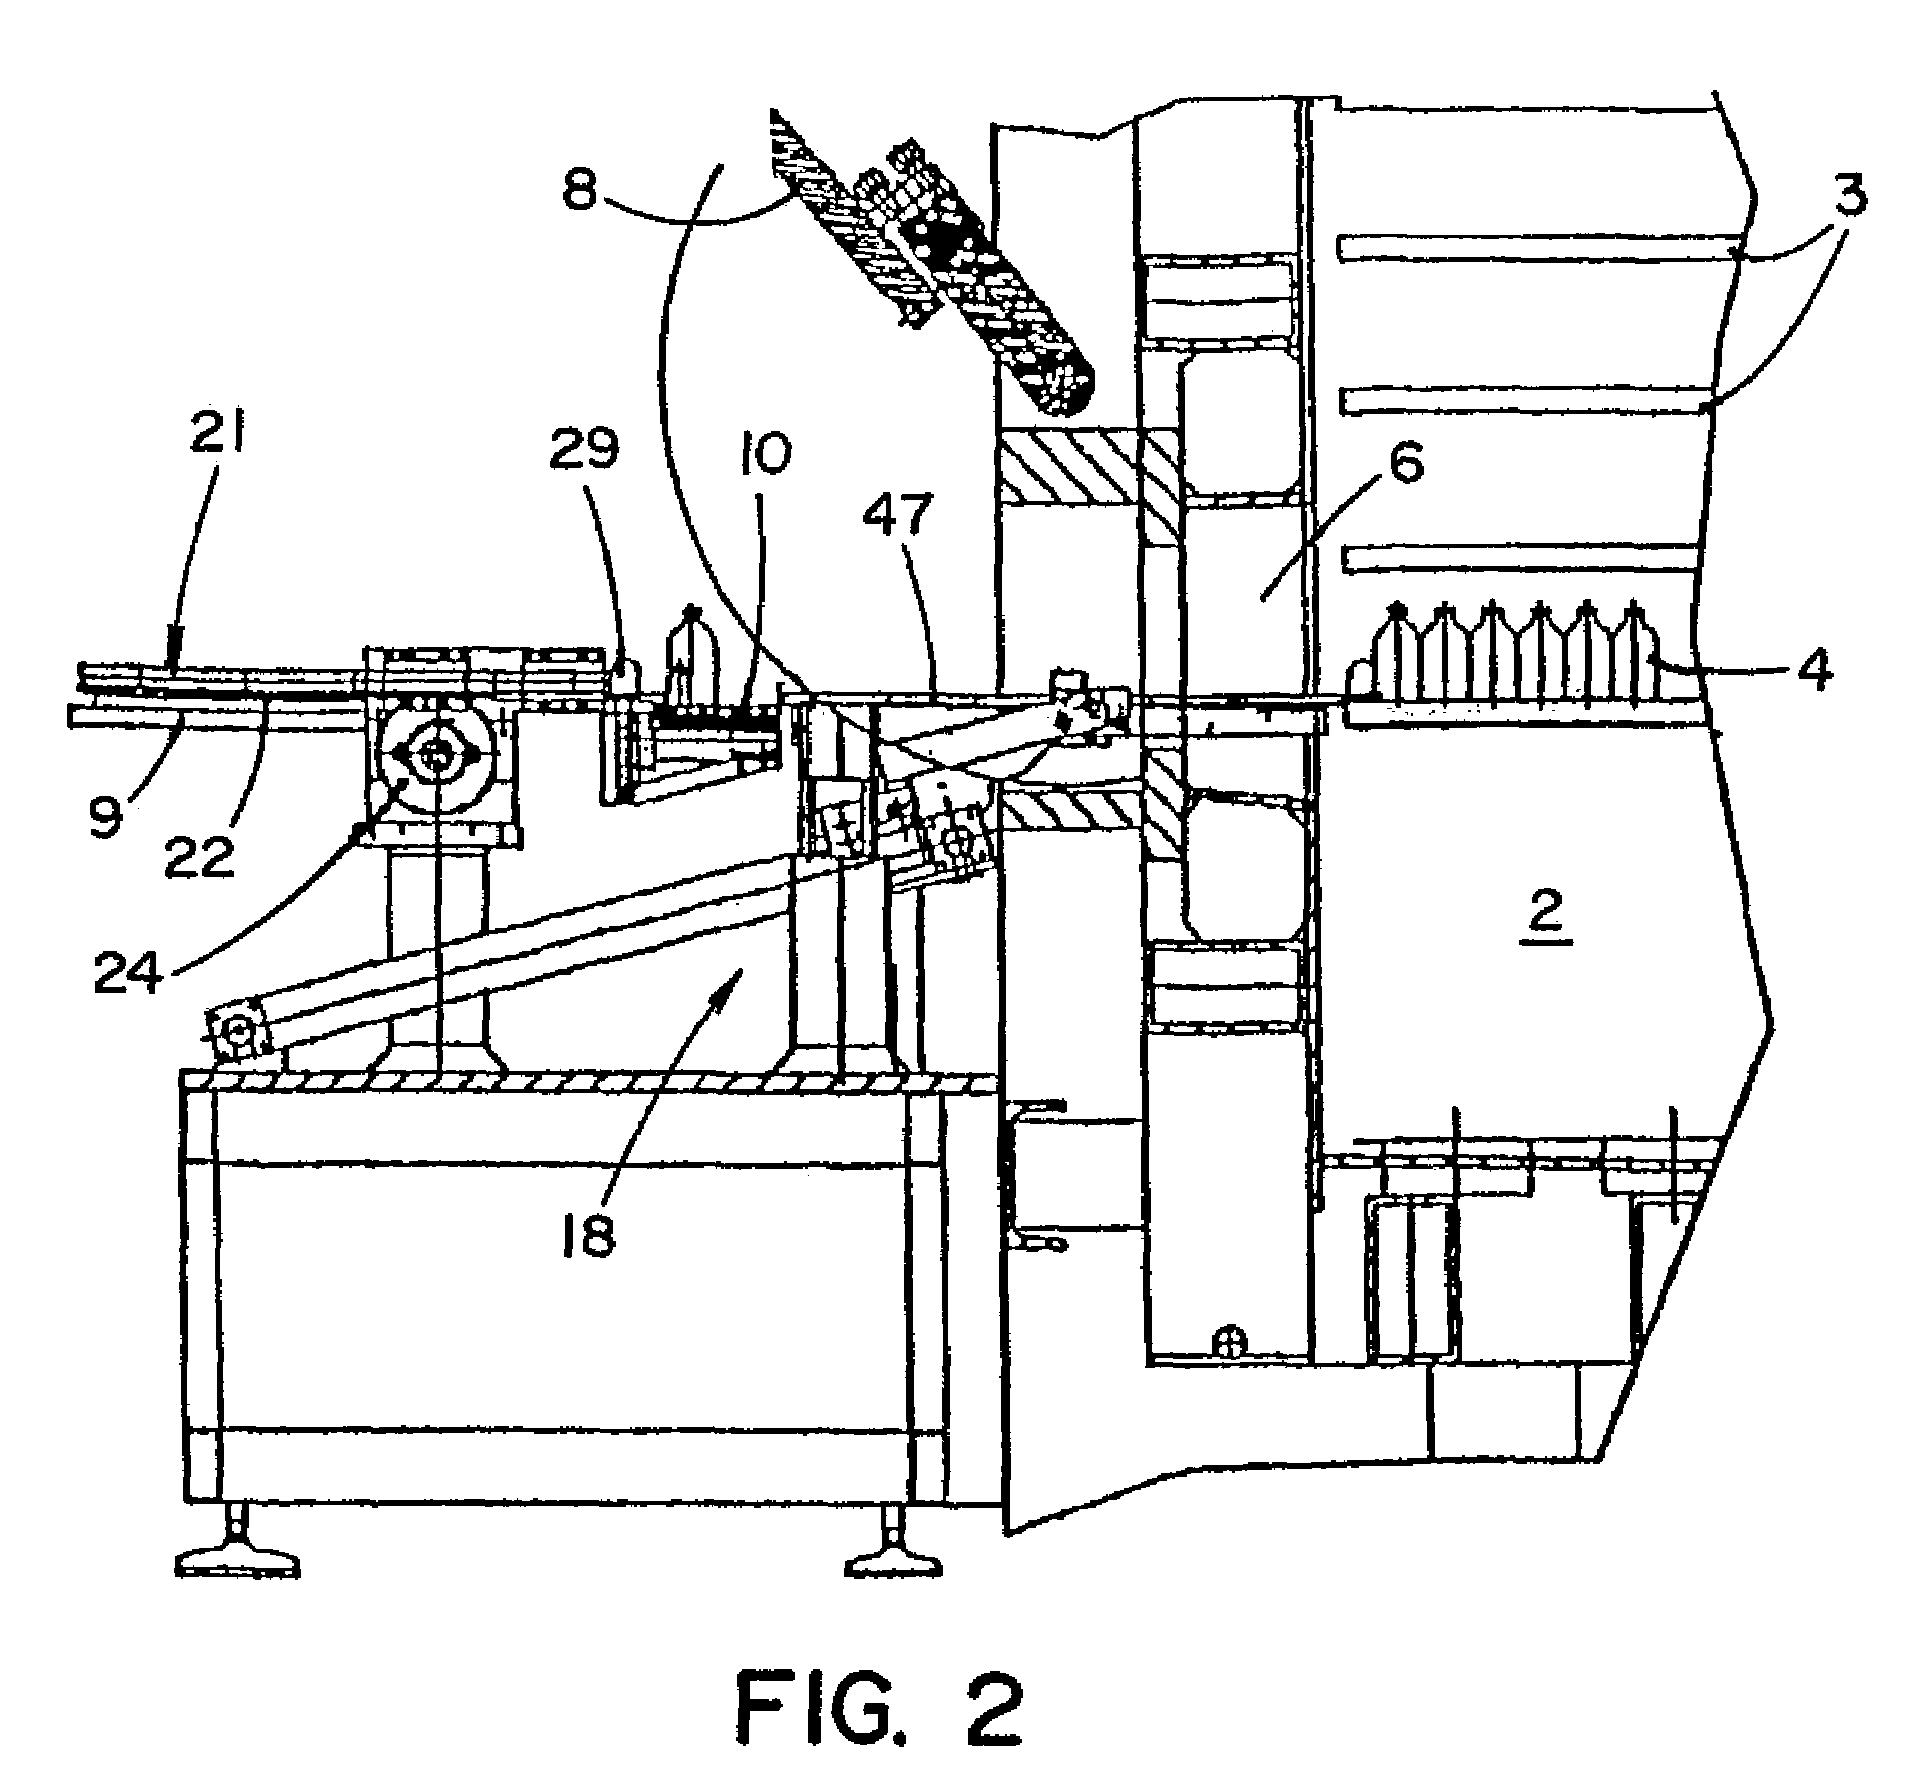 Apparatus for loading and unloading freeze-drying chambers